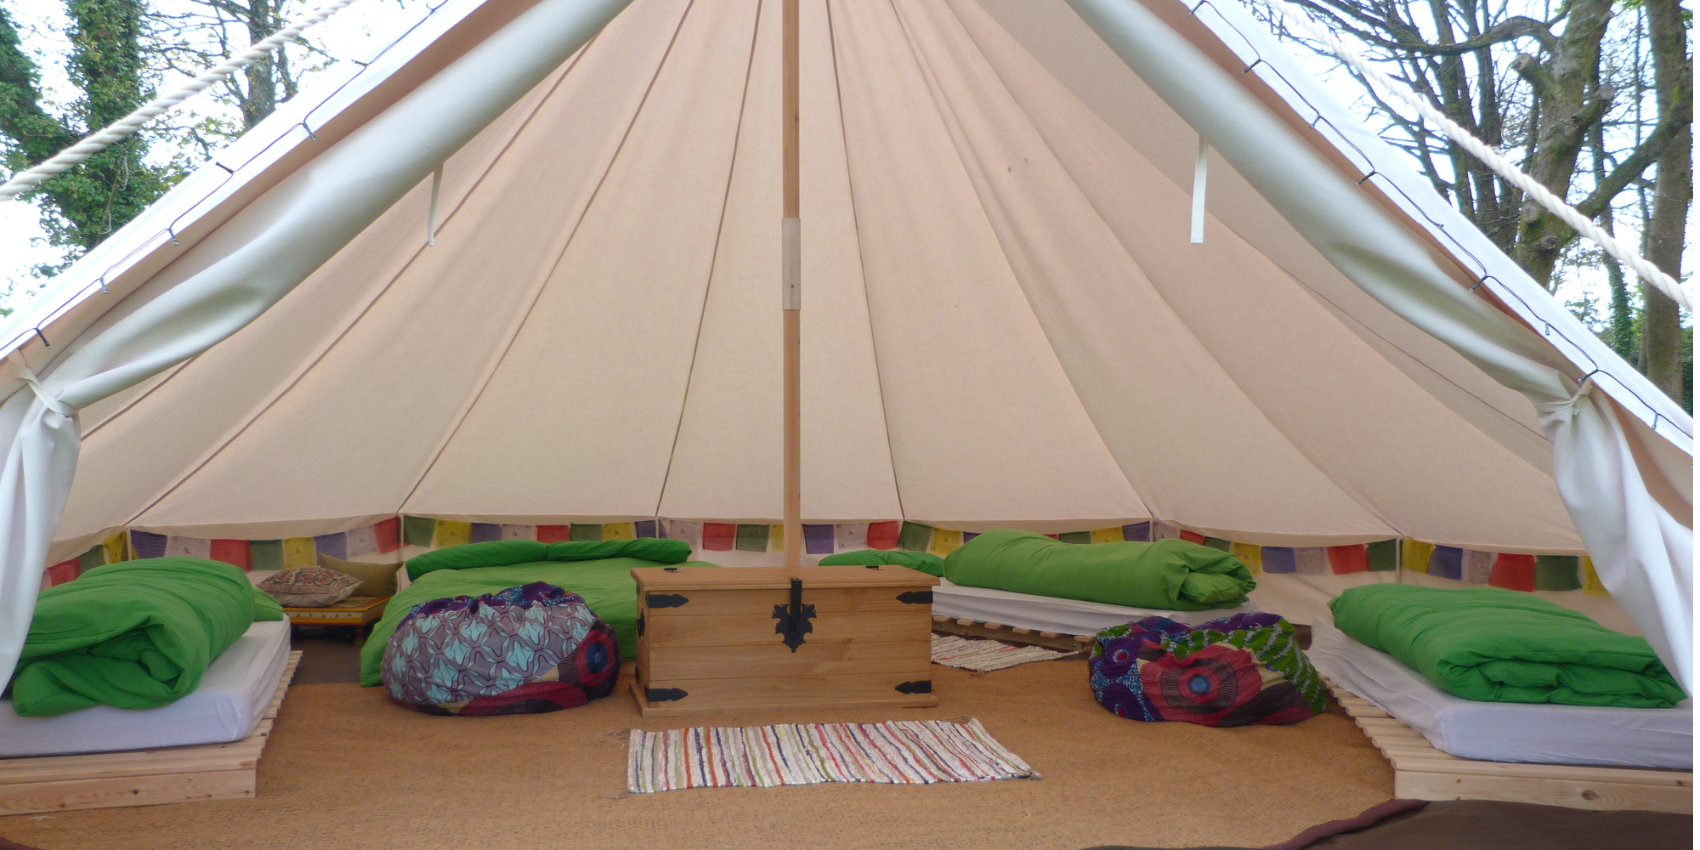 Bell tents with green cushions